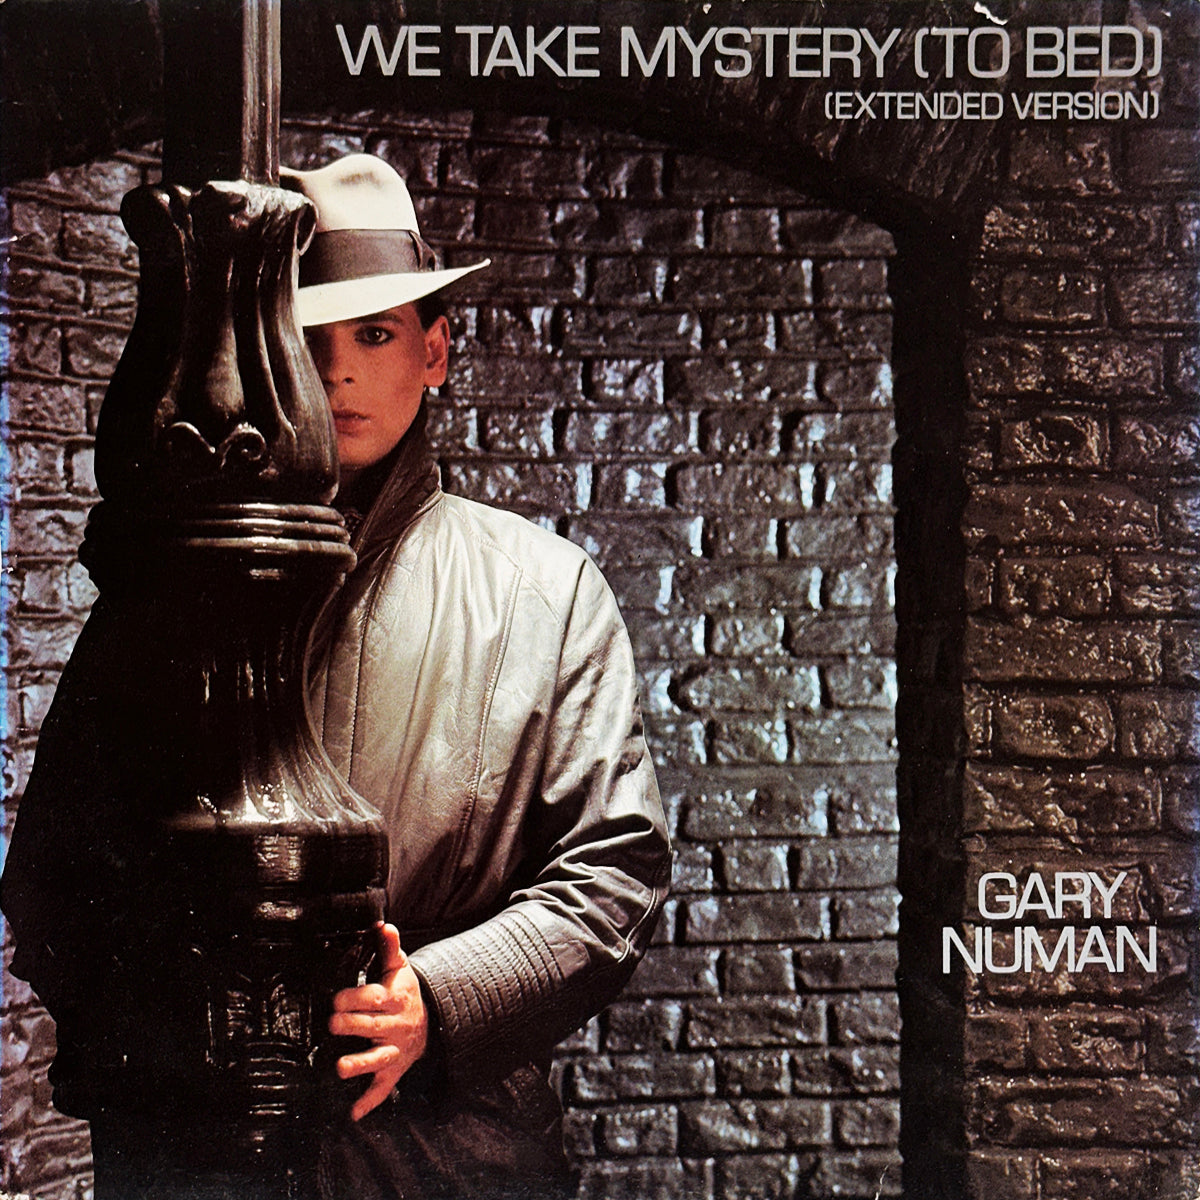 We Take Mystery (To Bed) (Extended Version)